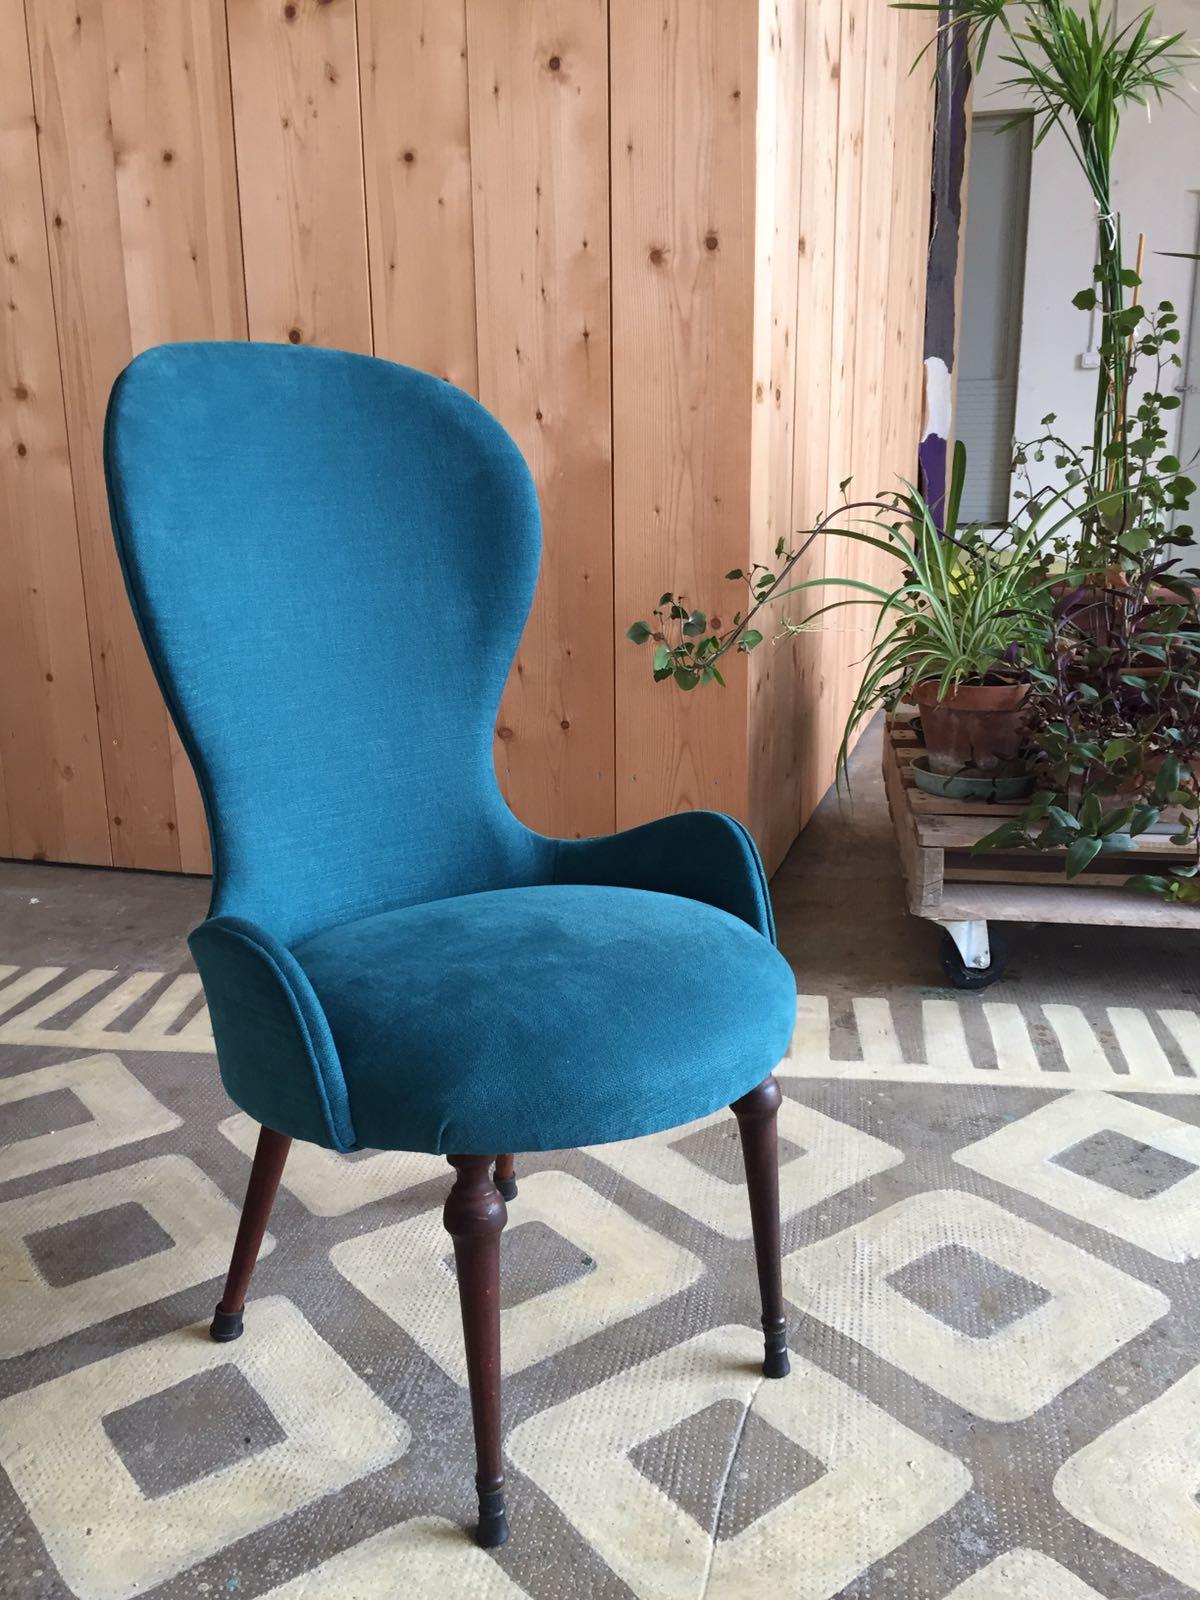 A stunning pair of déco high-backed side chairs with round seat, made in Italy in 1940s.
Structure in wood, reupholstered in new petrol blu fabric.